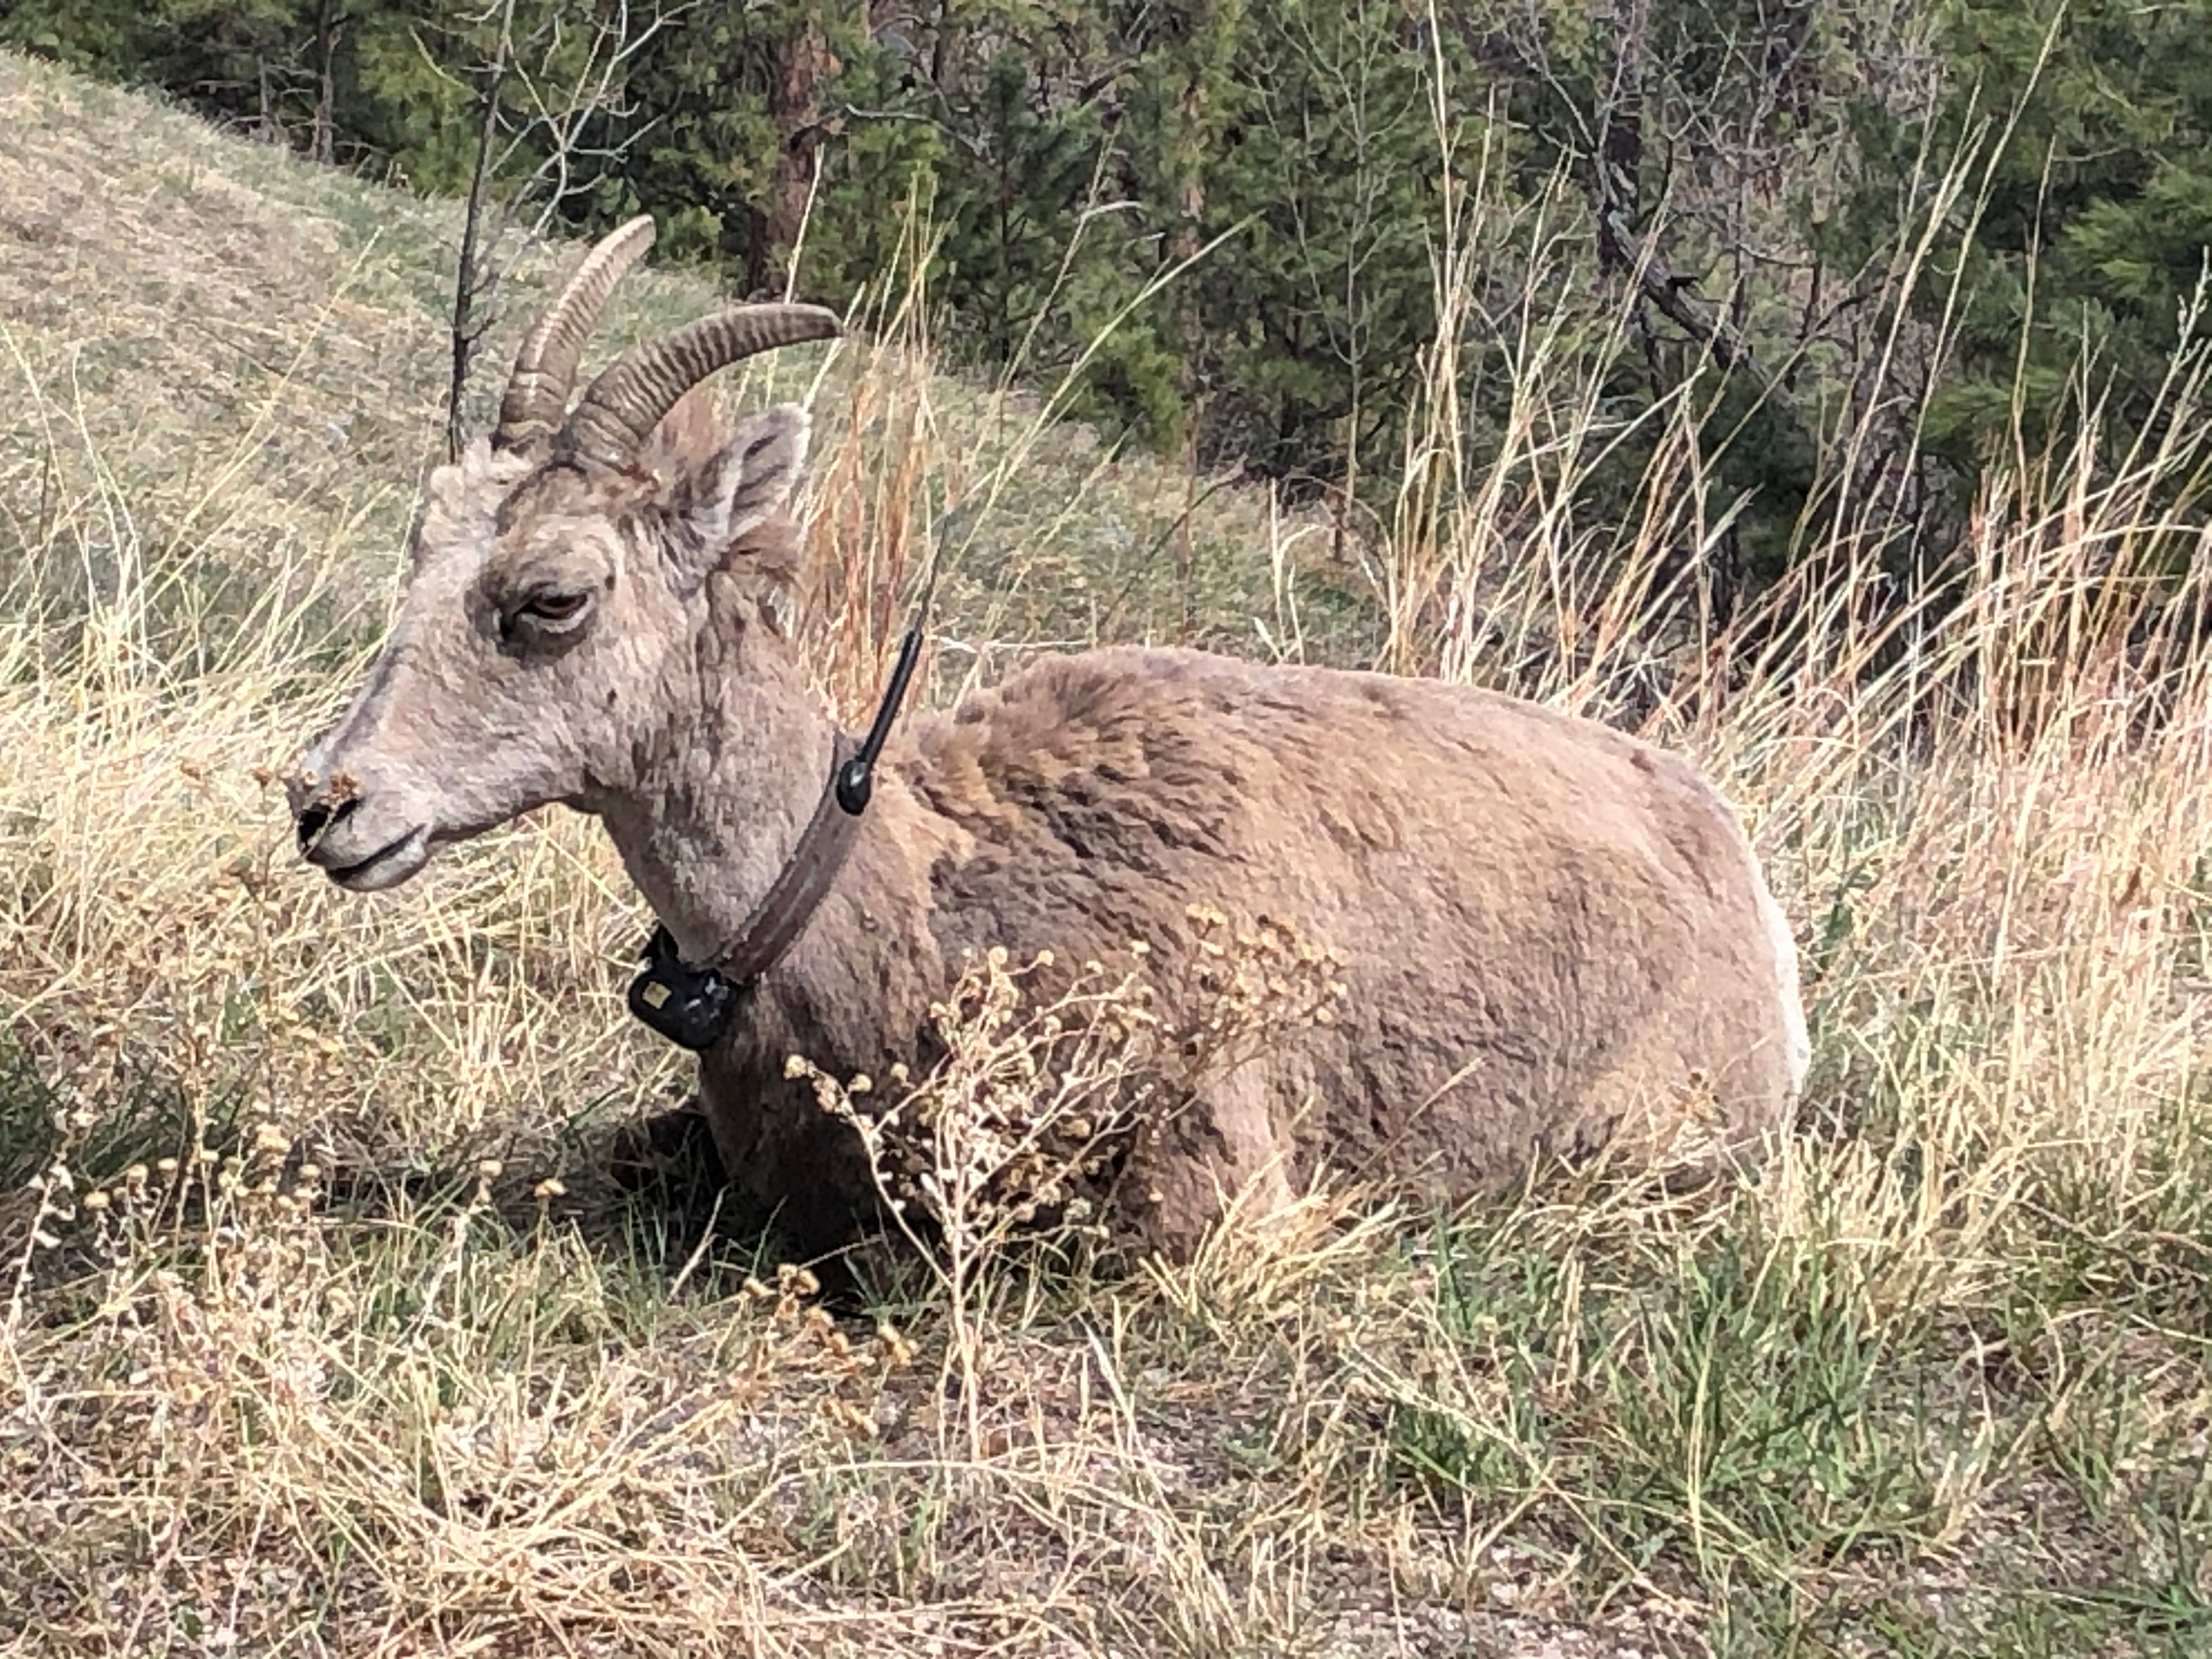 Big horn sheep with a tracking device around its' neck